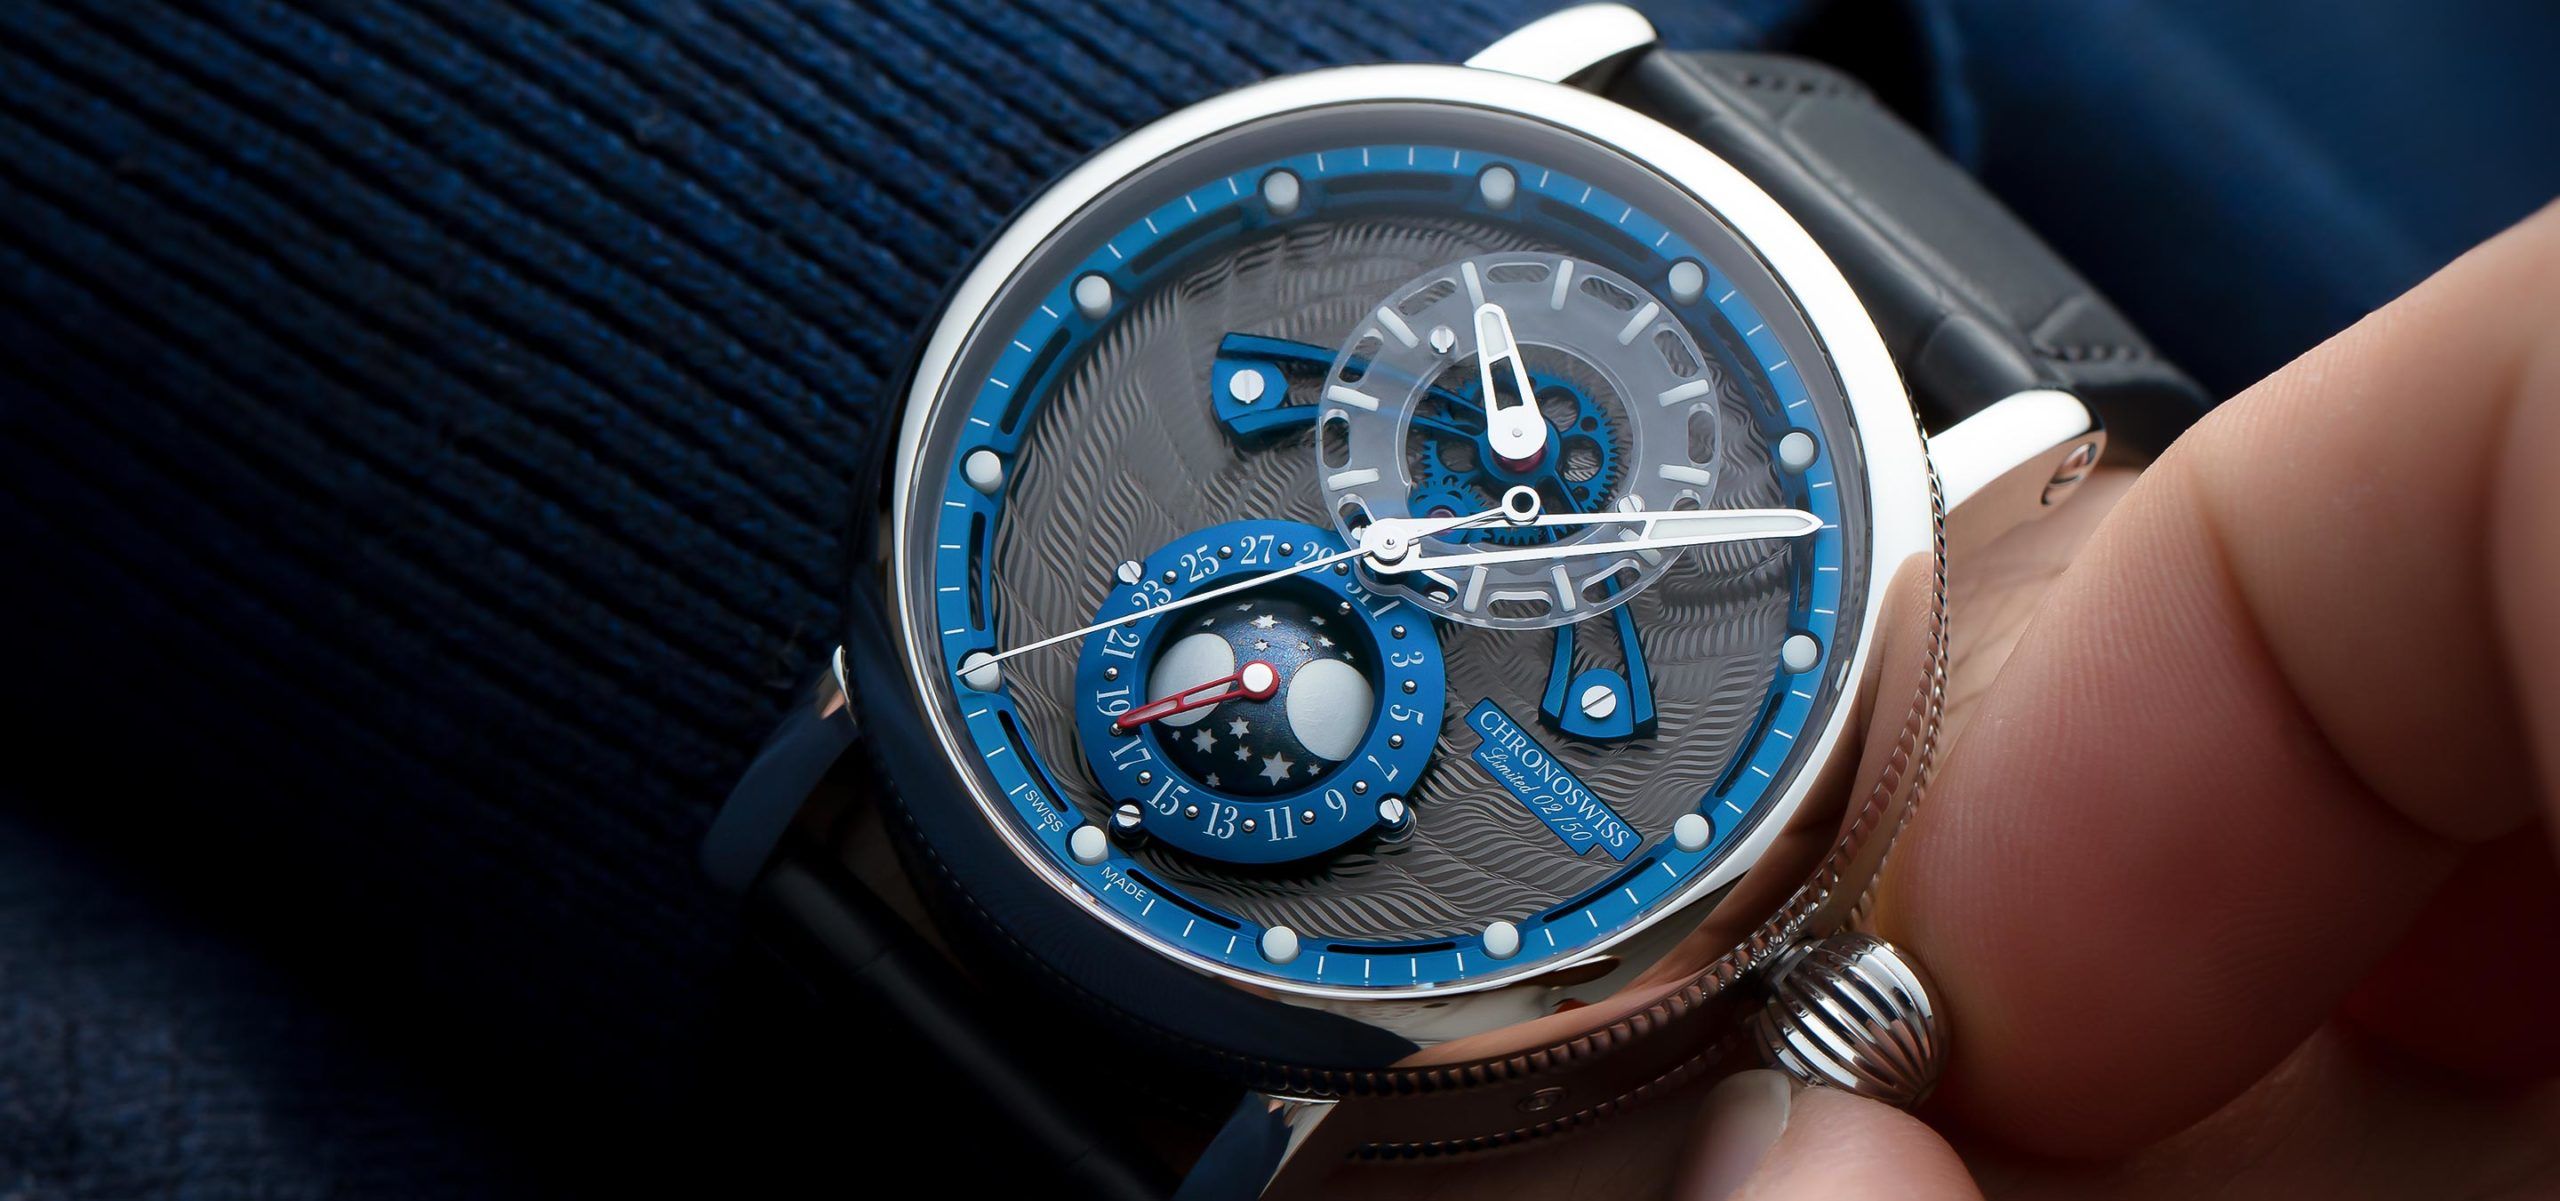 A Galactic Love Affair: The Many Shades Of The Chronoswiss Space Timer Series